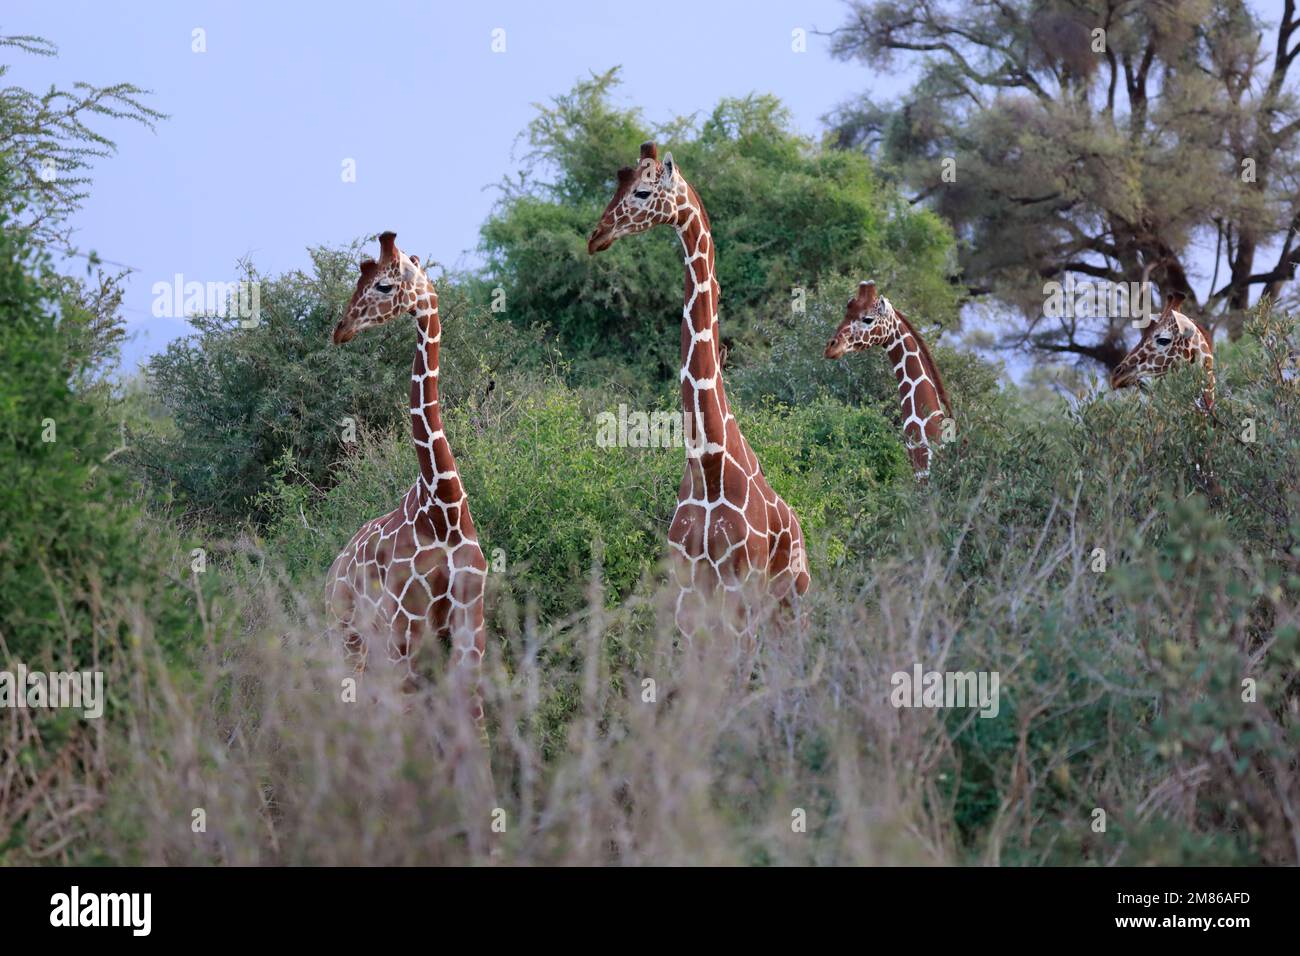 Four reticulated giraffes watch a leopard walk past them. Her gaze is directed straight at the cat. The predator is not in the picture. Kenya- Samburu Stock Photo